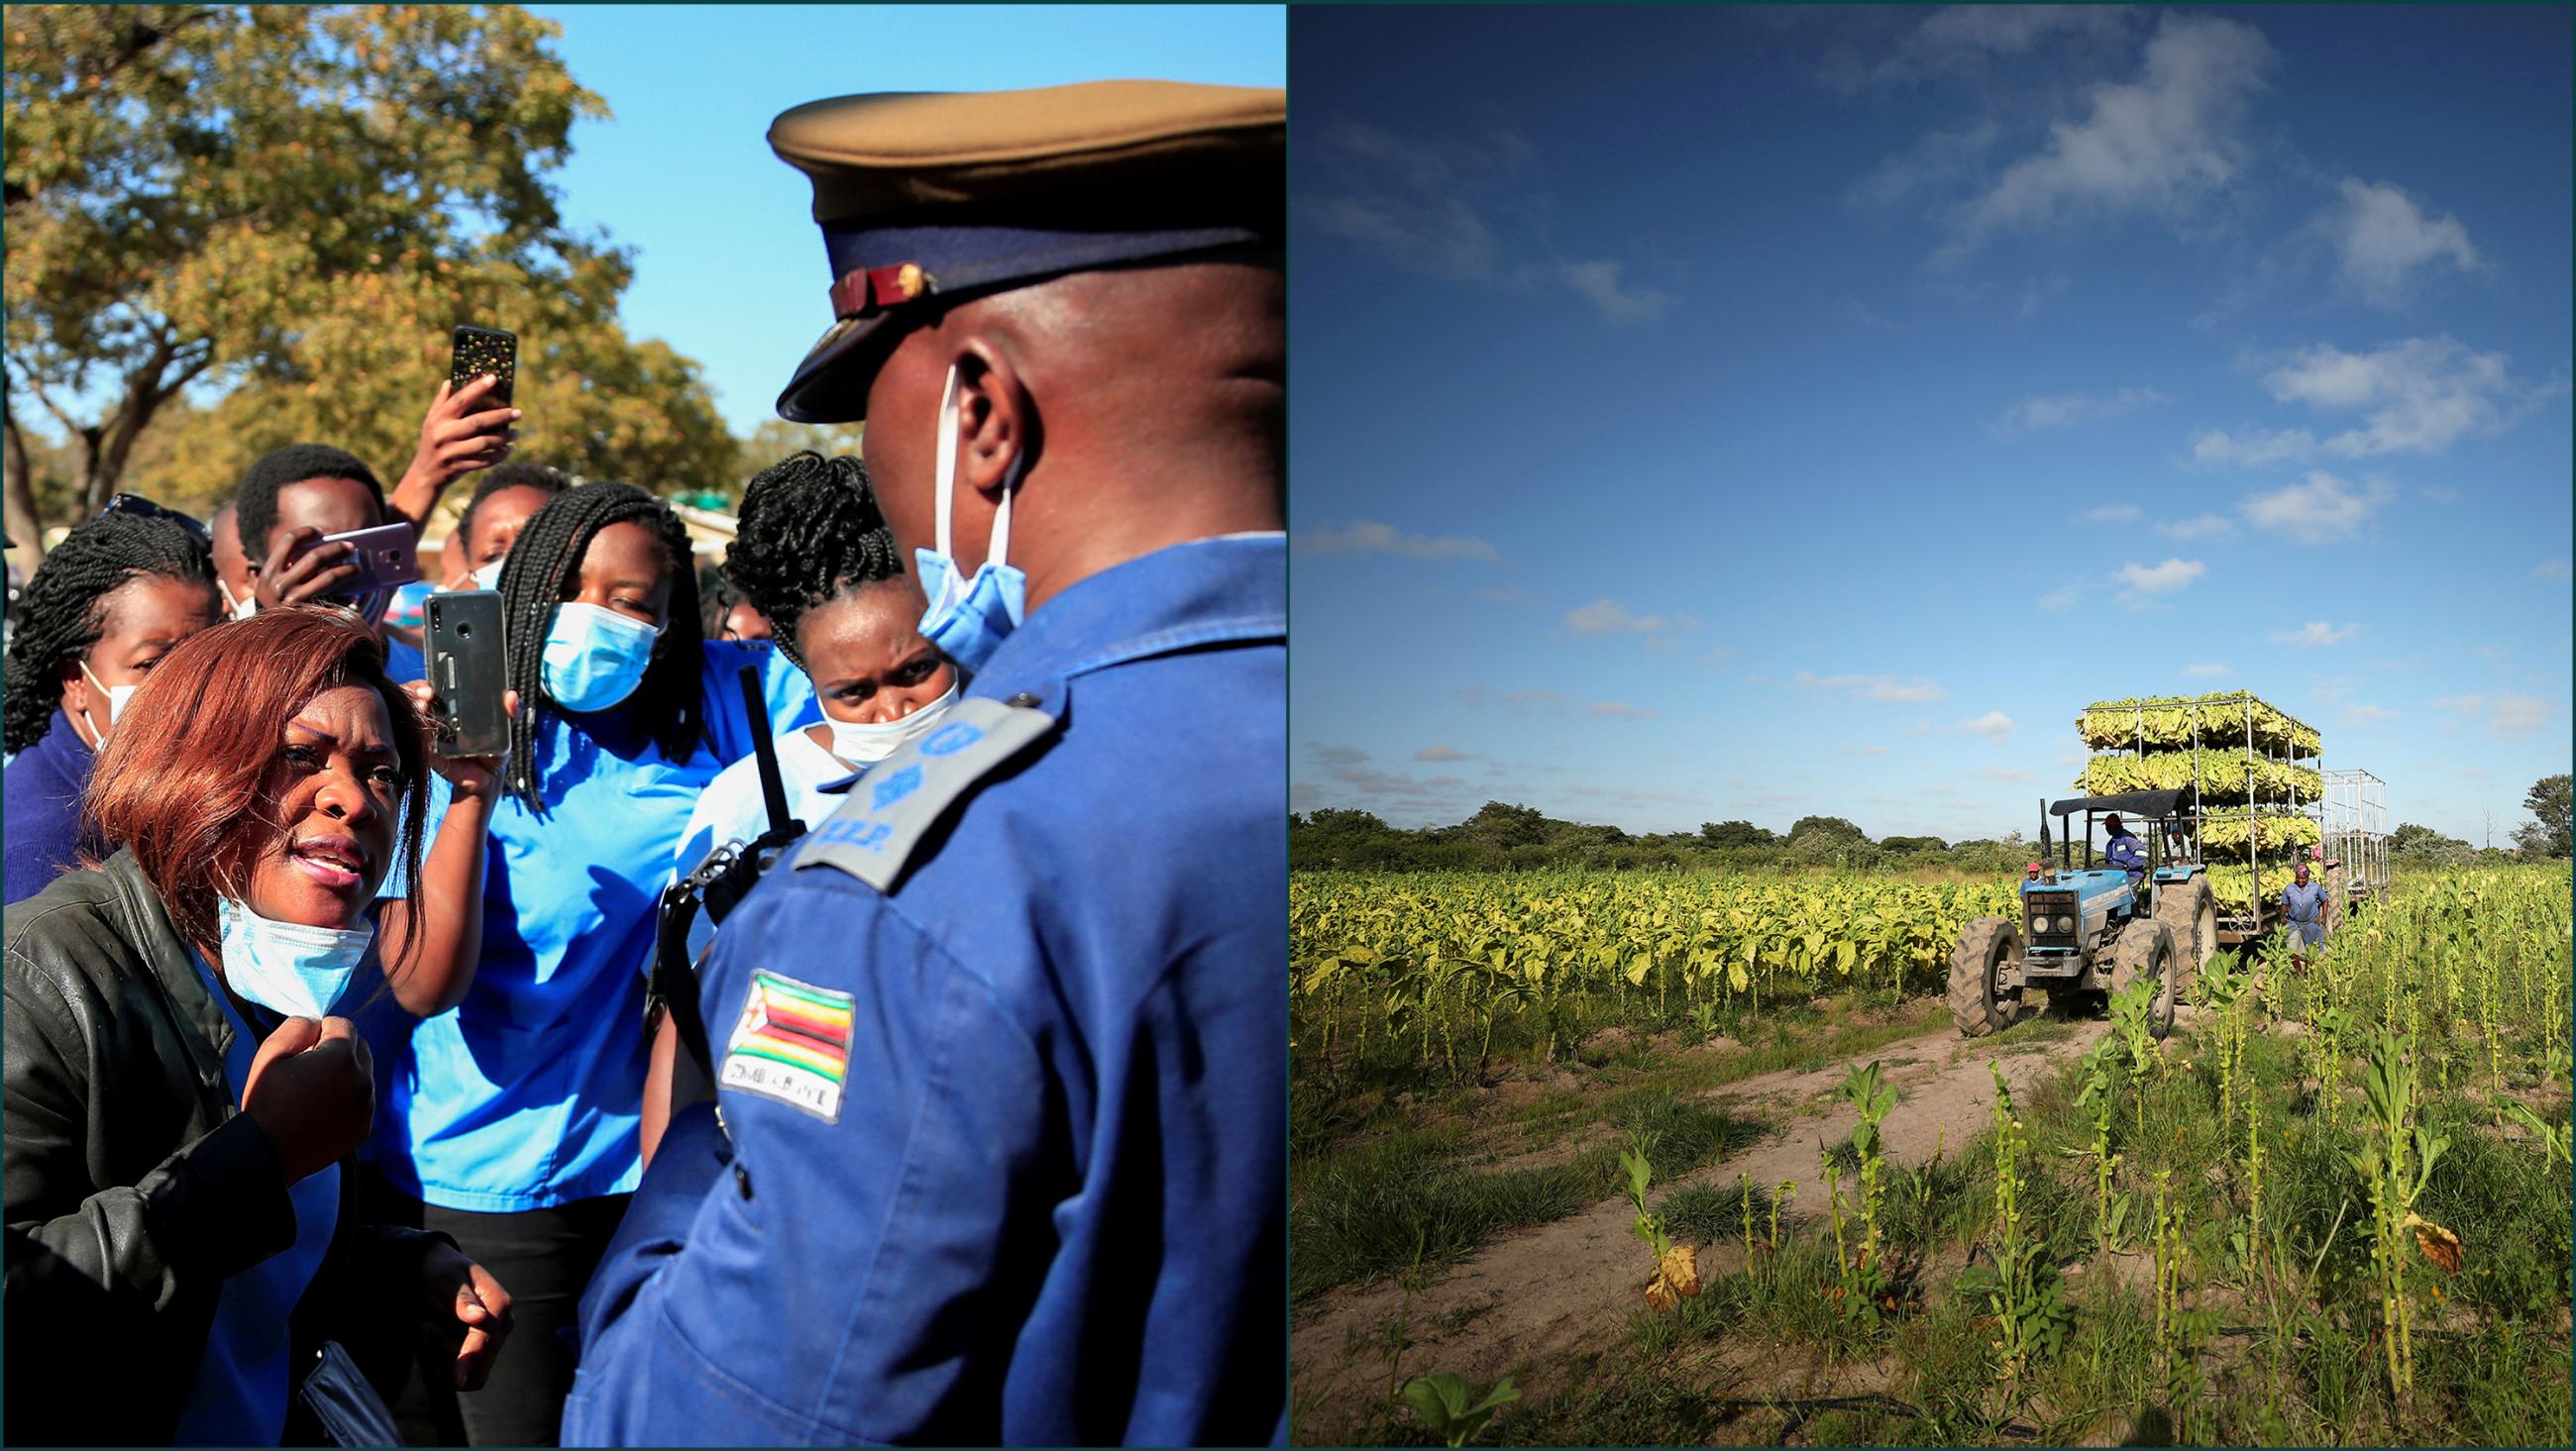 The country was once called. The photo is a split screen showing a woman passionately confronting police at a protest and a working farm with a large harvester on a sunny, blue-sky day. 